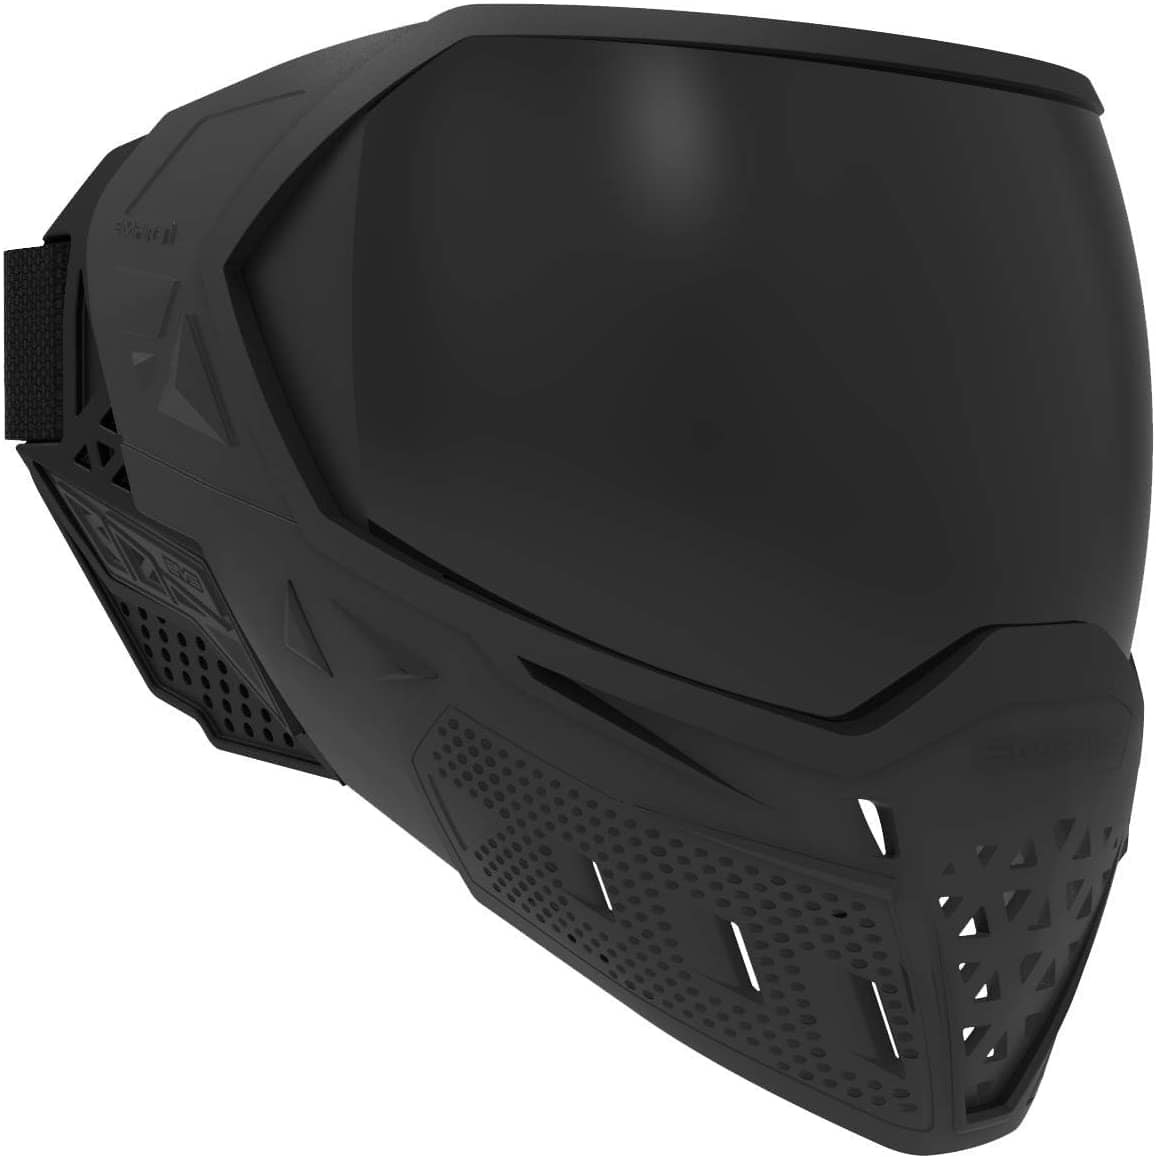 Empire EVS Paintball Mask Black with Extra Lens - Eminent Paintball And Airsoft